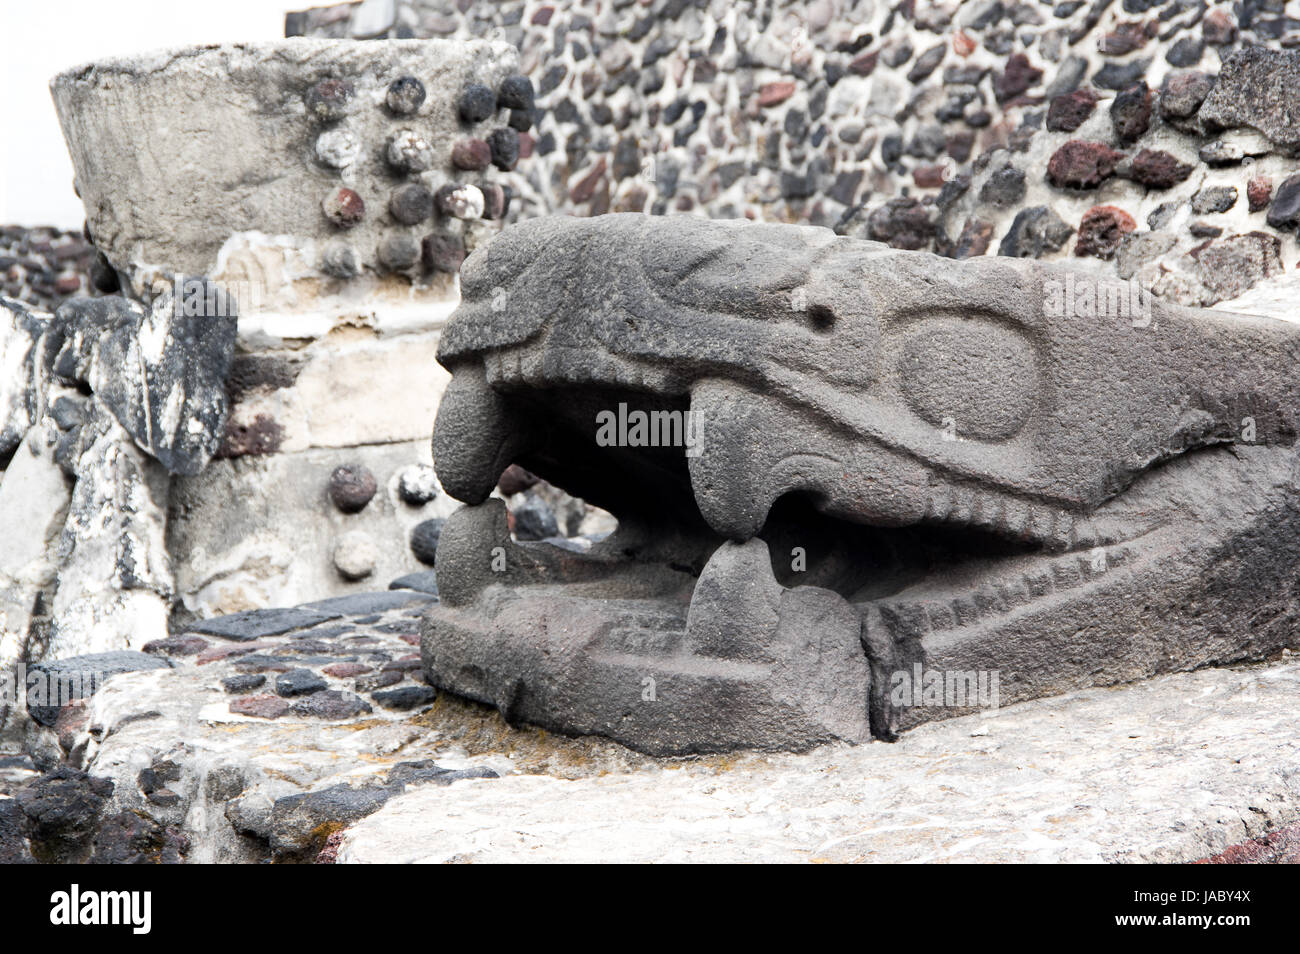 The Aztec ruins of Templo Mayor, a UNESCO World Heritage site, in Mexico City Stock Photo